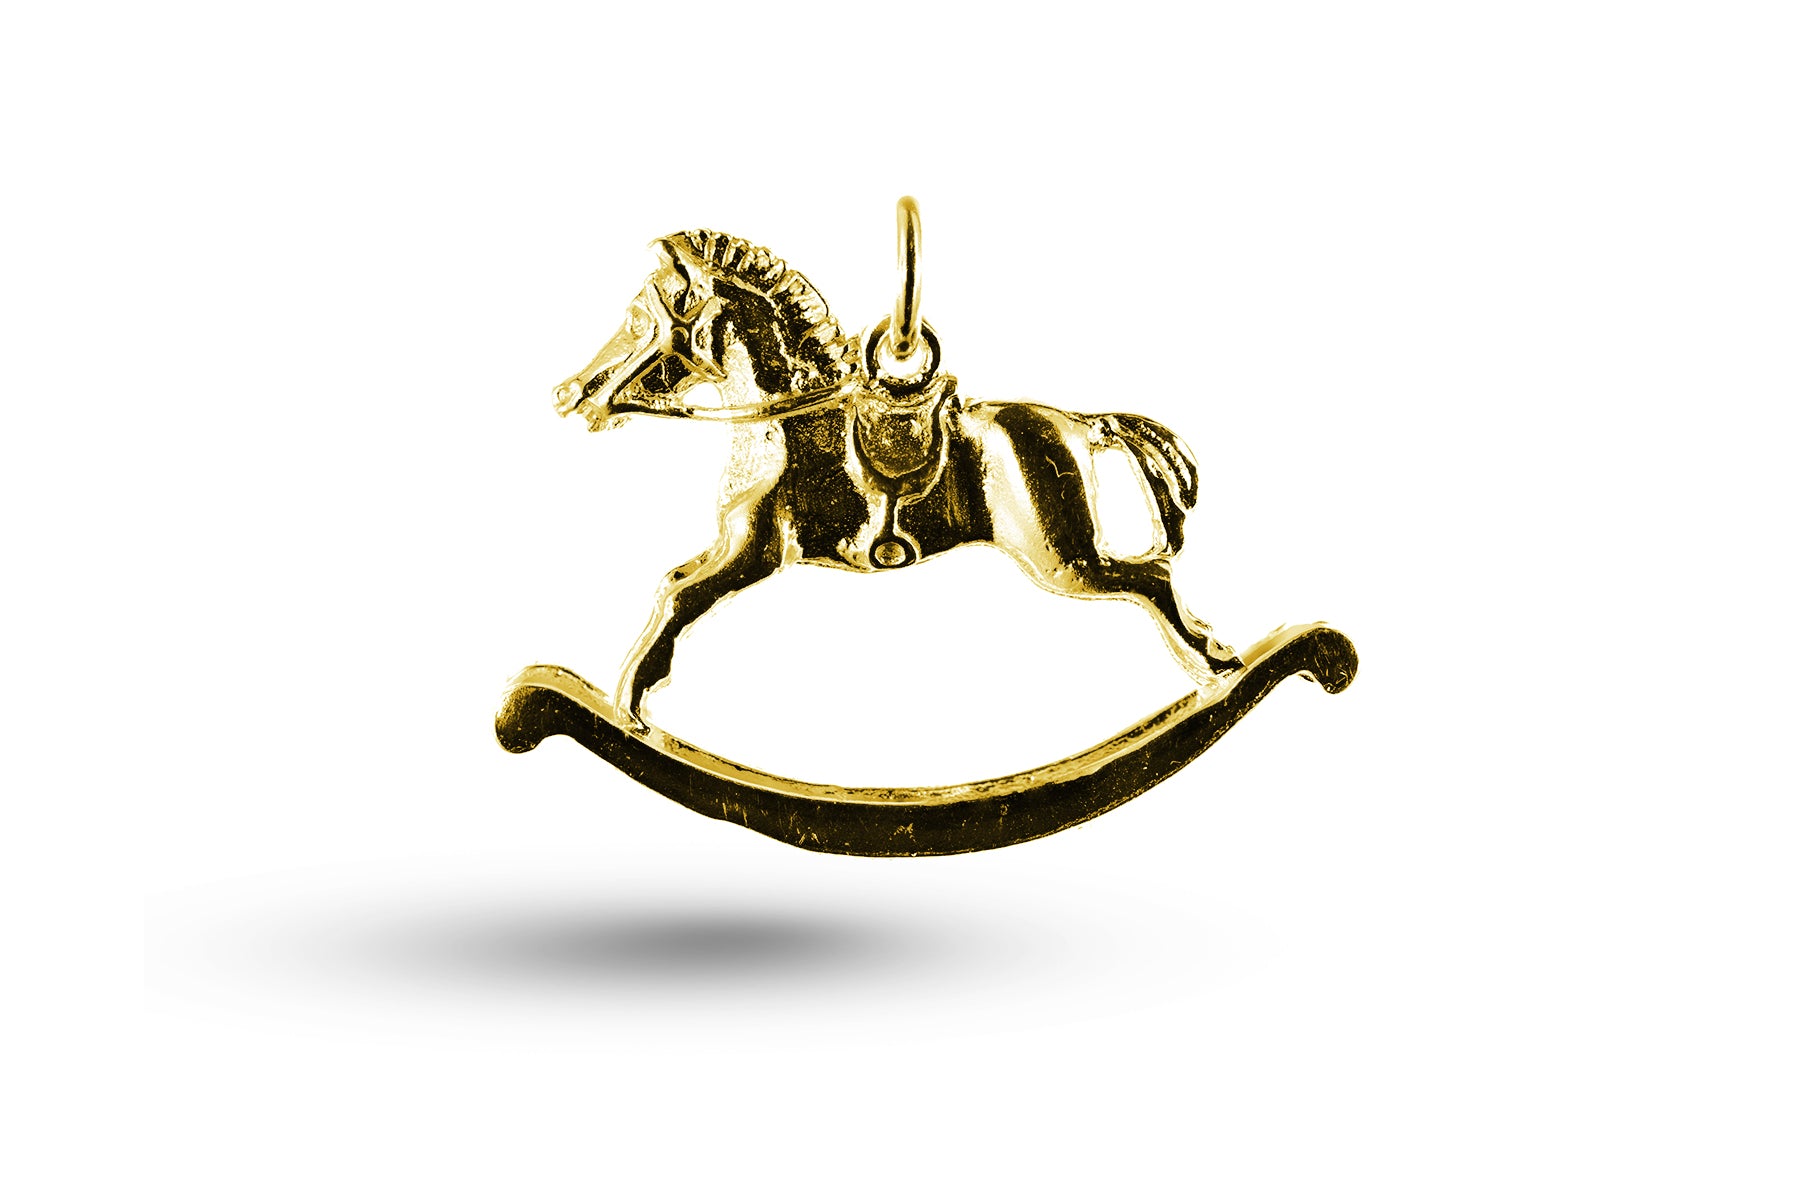 Yellow gold Childs Rocking Horse charm.